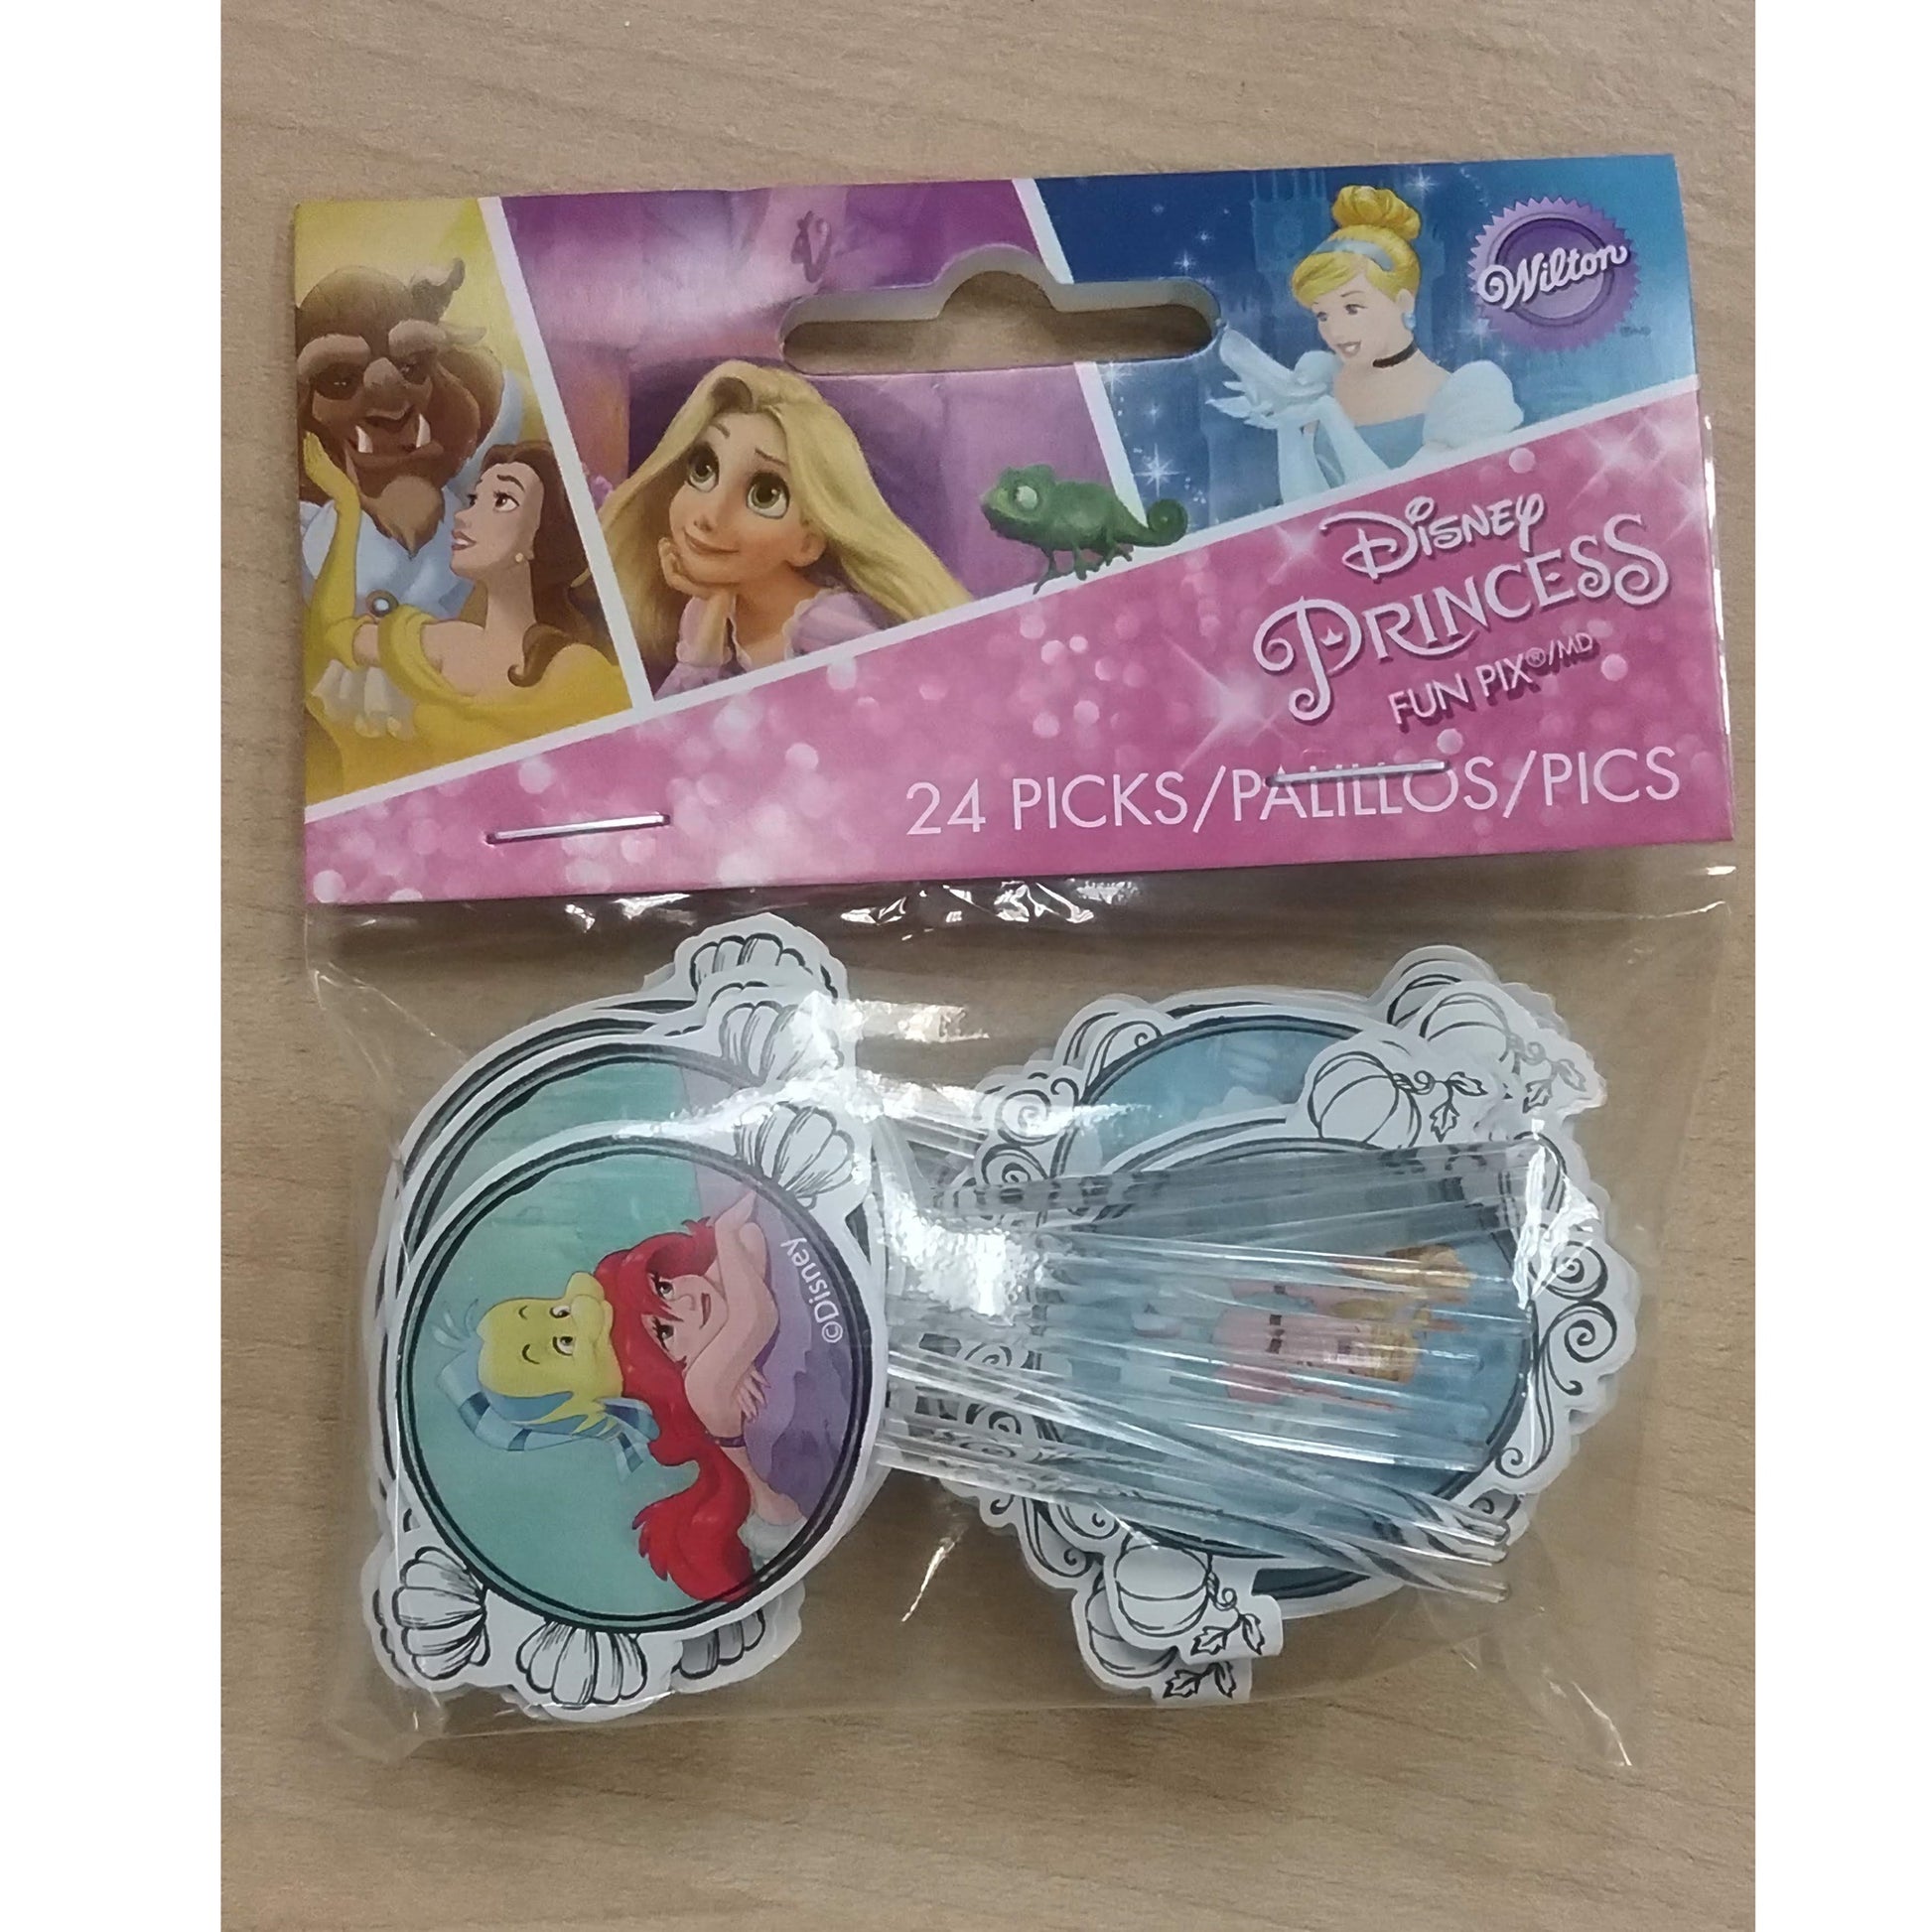 Packaged Disney Princess cupcake picks showing Ariel, Belle, and Rapunzel on the card, with the picks themselves featuring Ariel in a swimming pose.